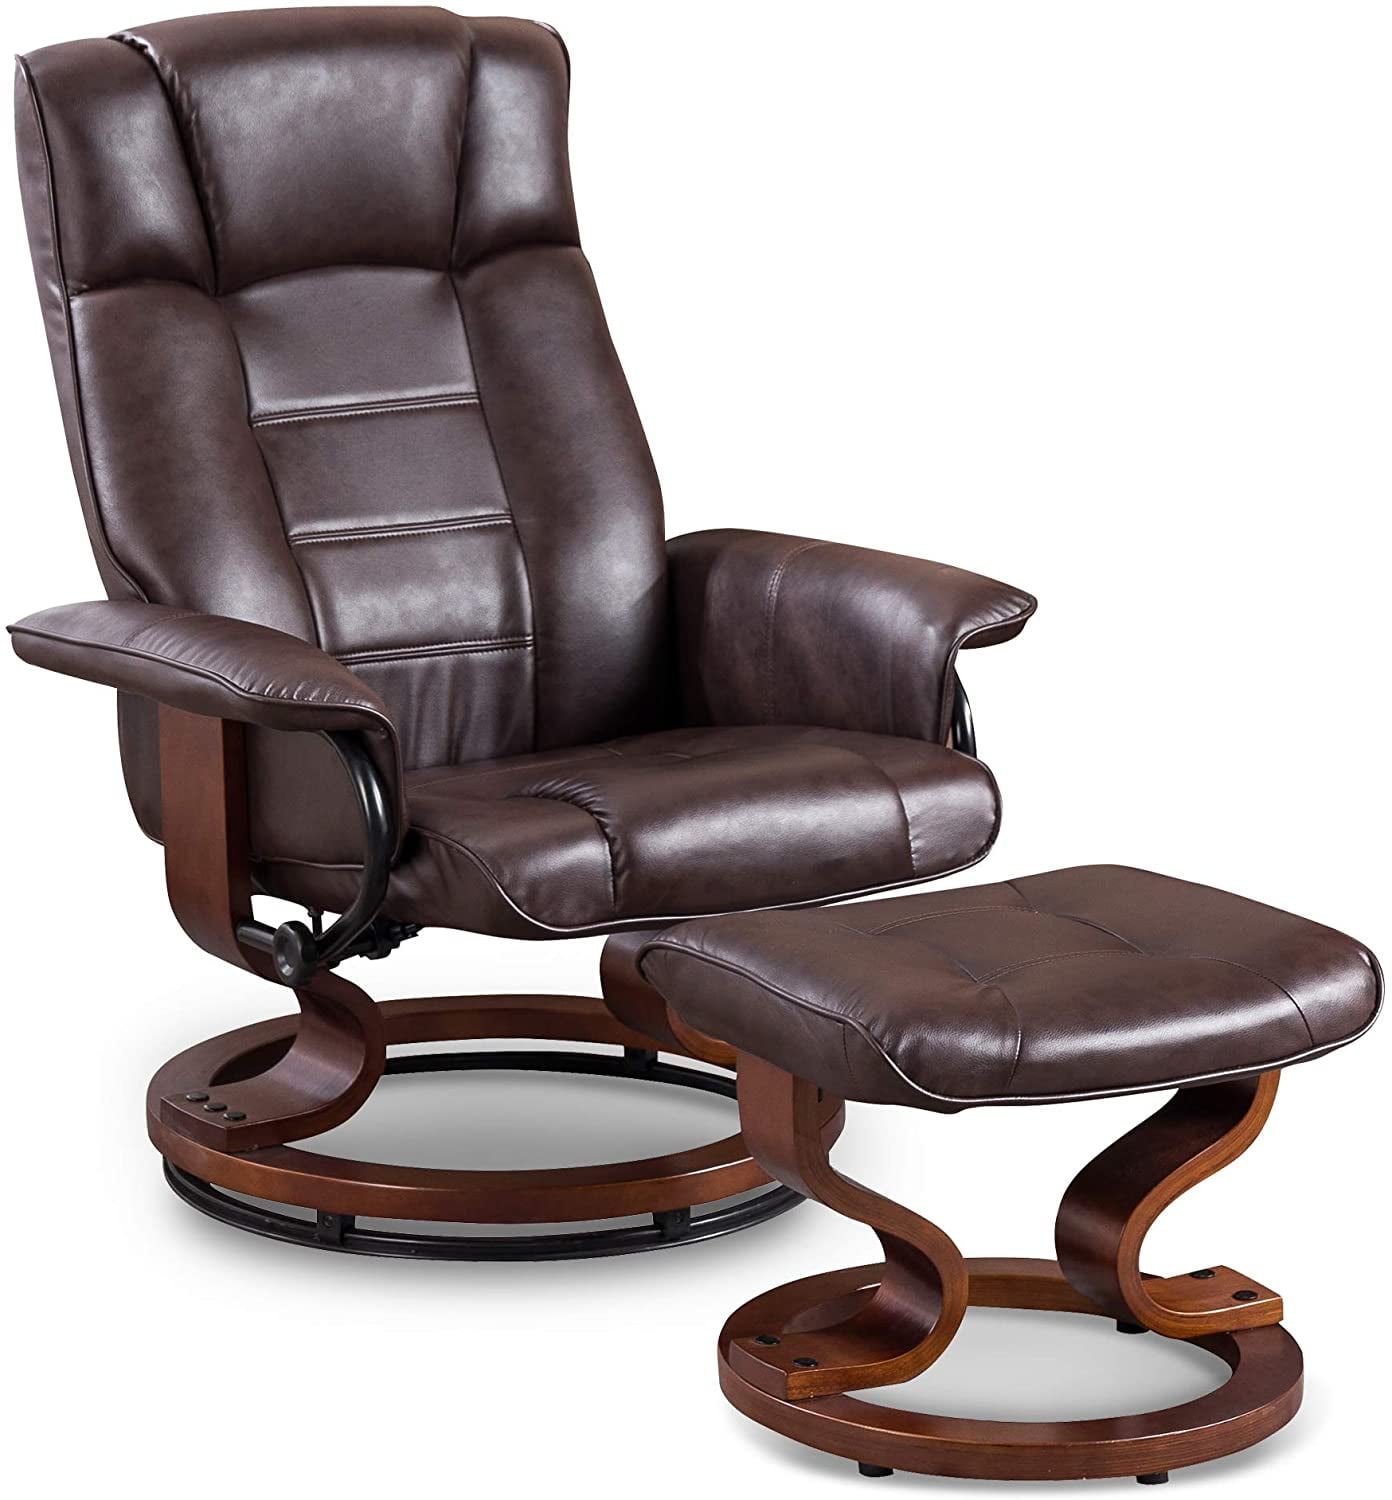 Leather Soft Swiveling Recliner Chair With Wrapped